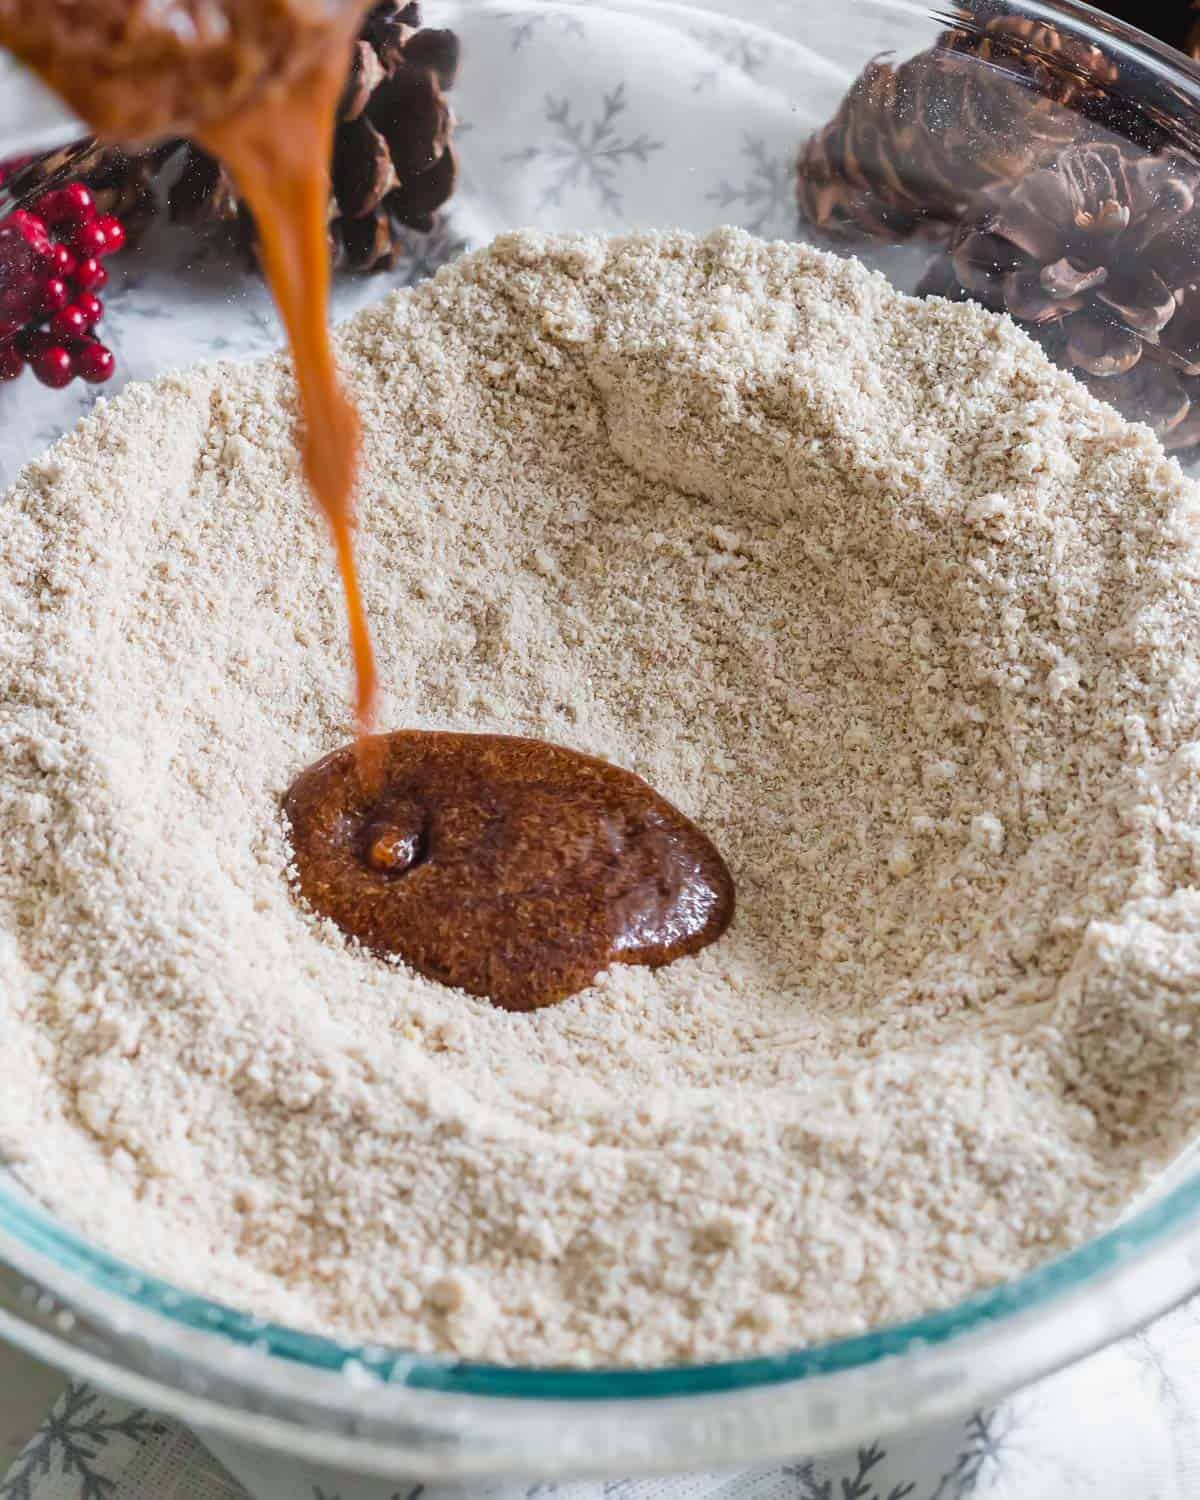 Oat flour and almond flour in a bowl with molasses to make gingerbread waffles.